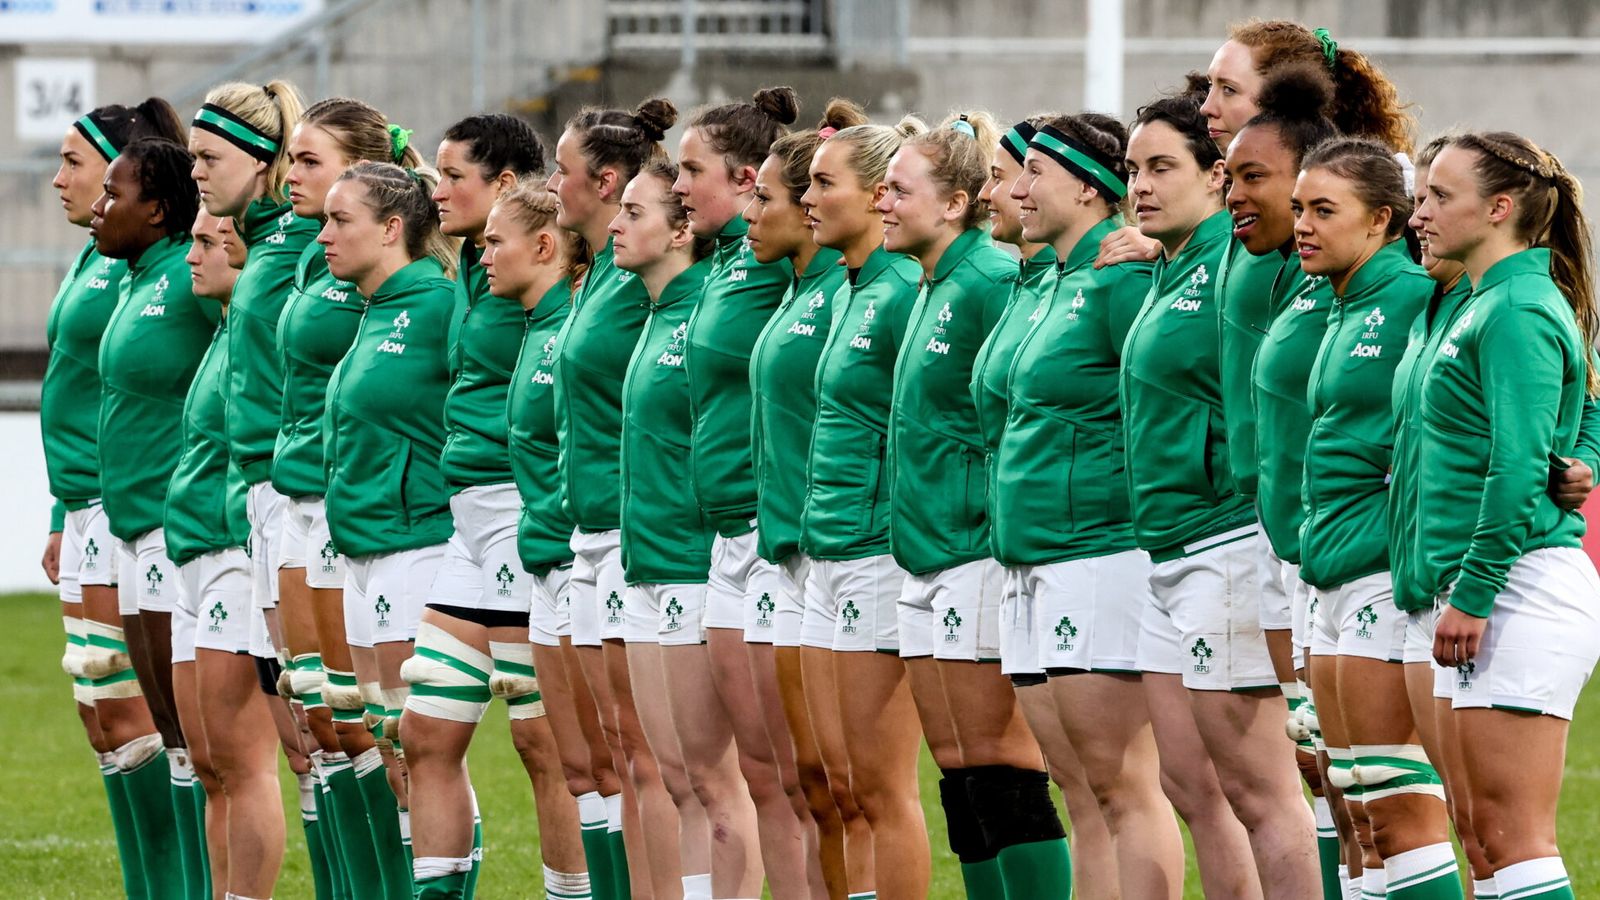 Irish Rugby Football Union announce 43 professional contracts for women’s players